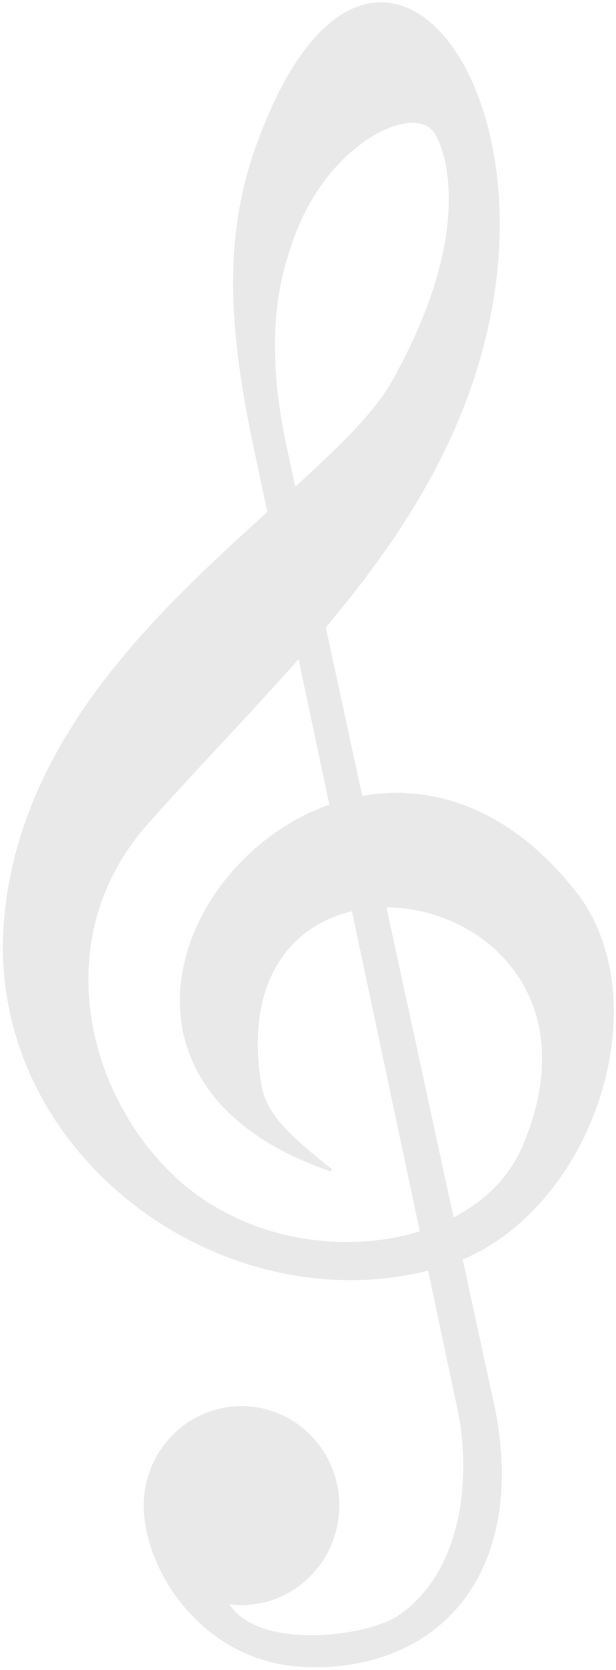 music-note